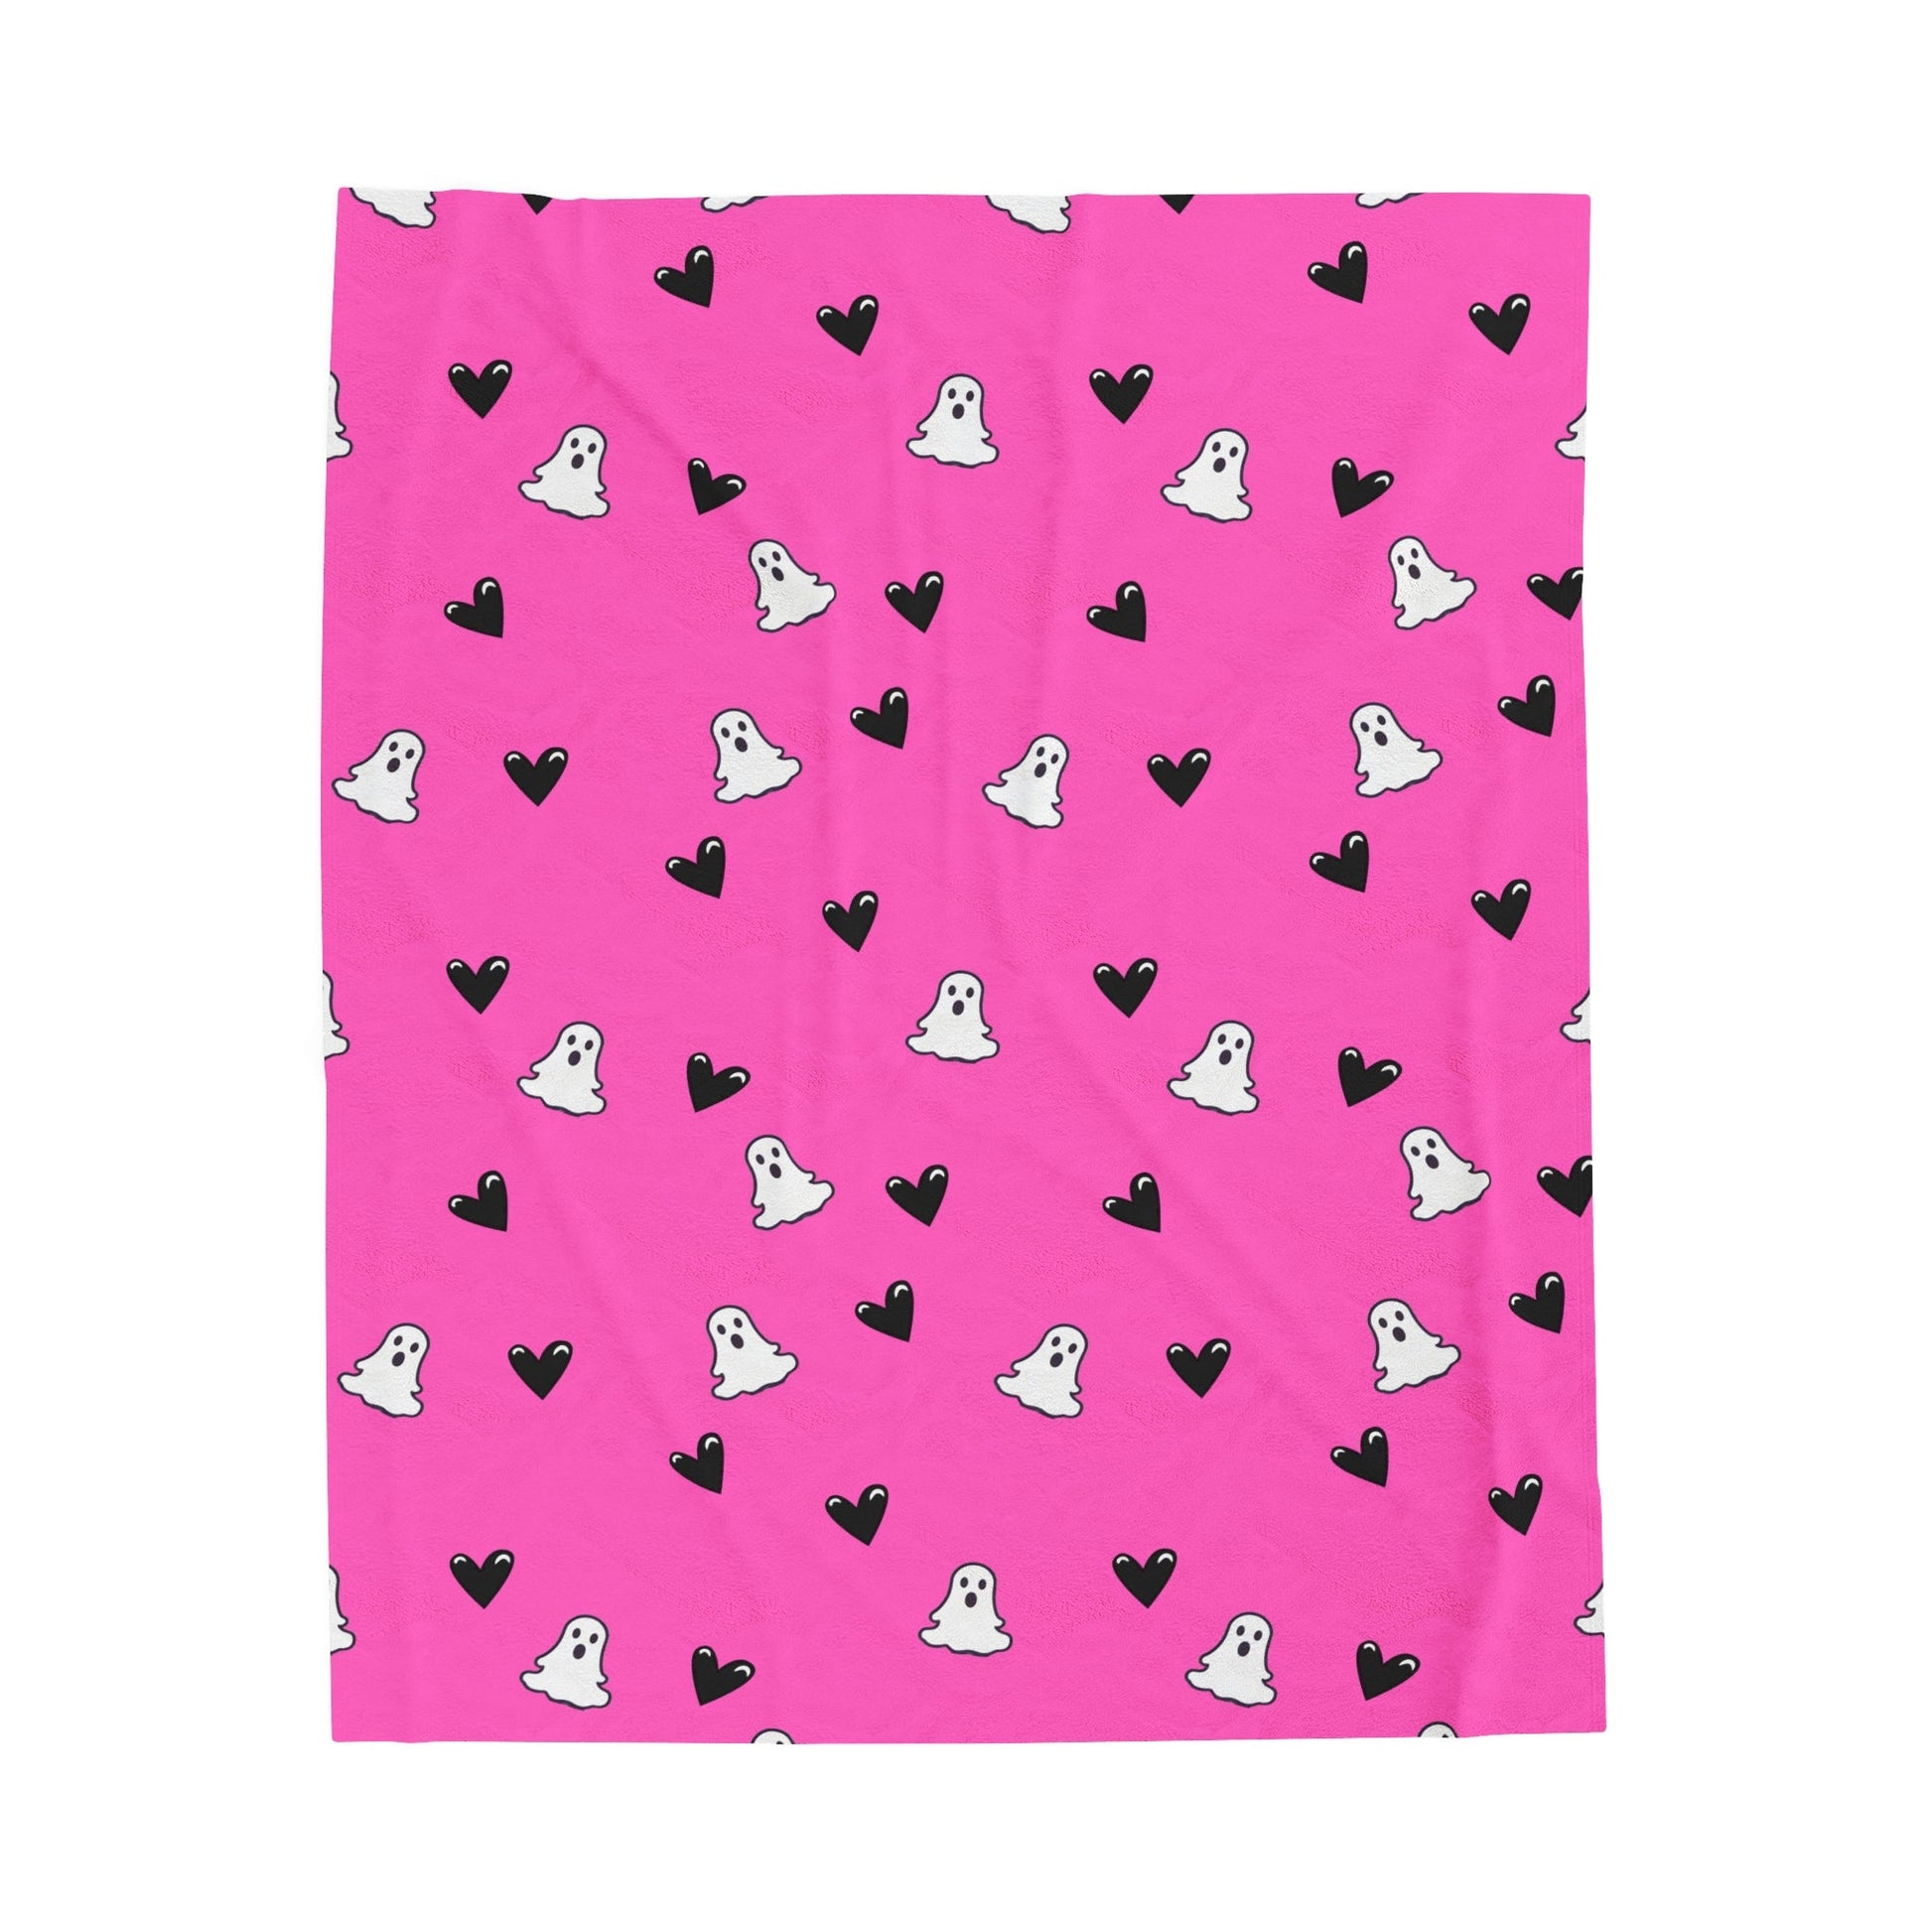 Ghosts and Black Hearts Throw BlanketAll Over PrintsVTZdesigns30" × 40"All Over PrintAOPBed